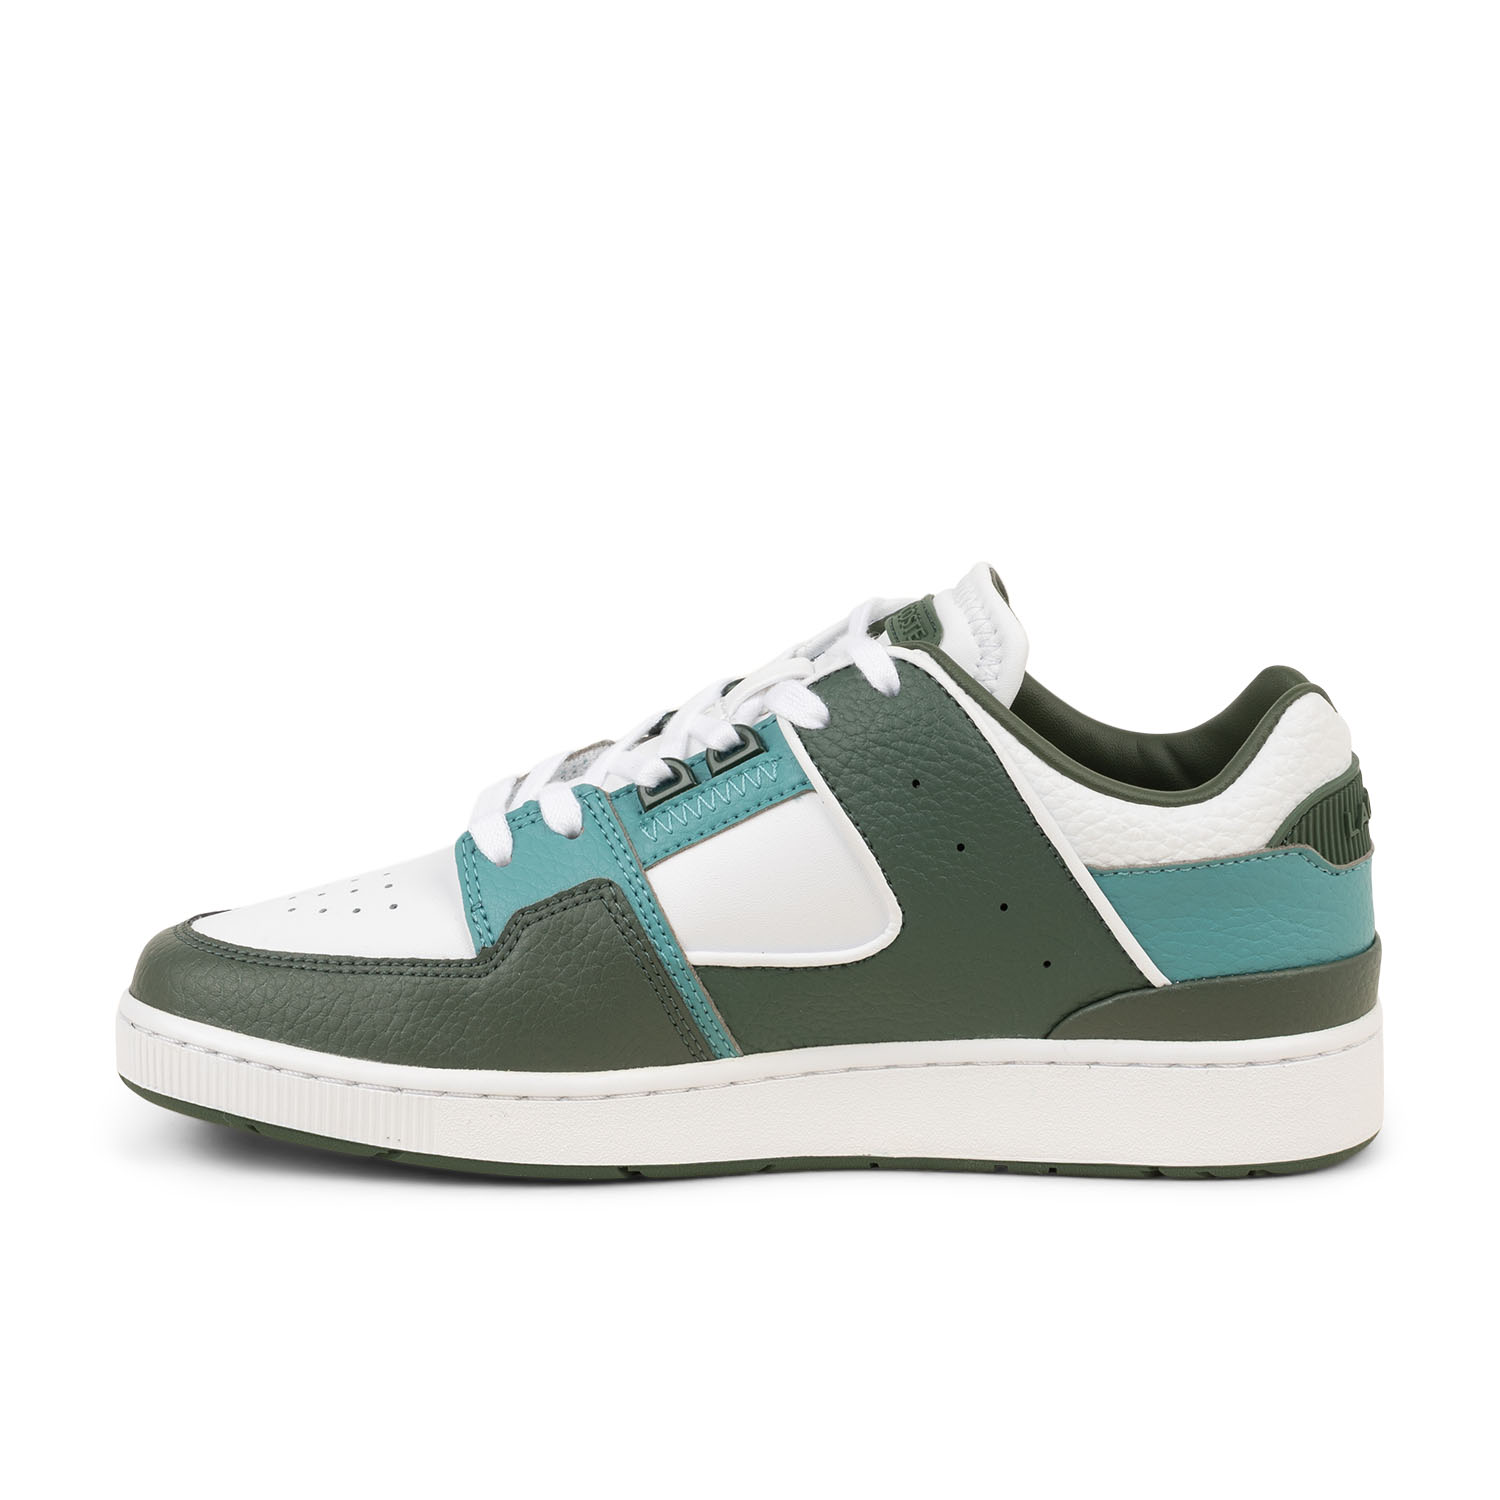 04 - COURT CAGE - LACOSTE - Baskets - Cuir